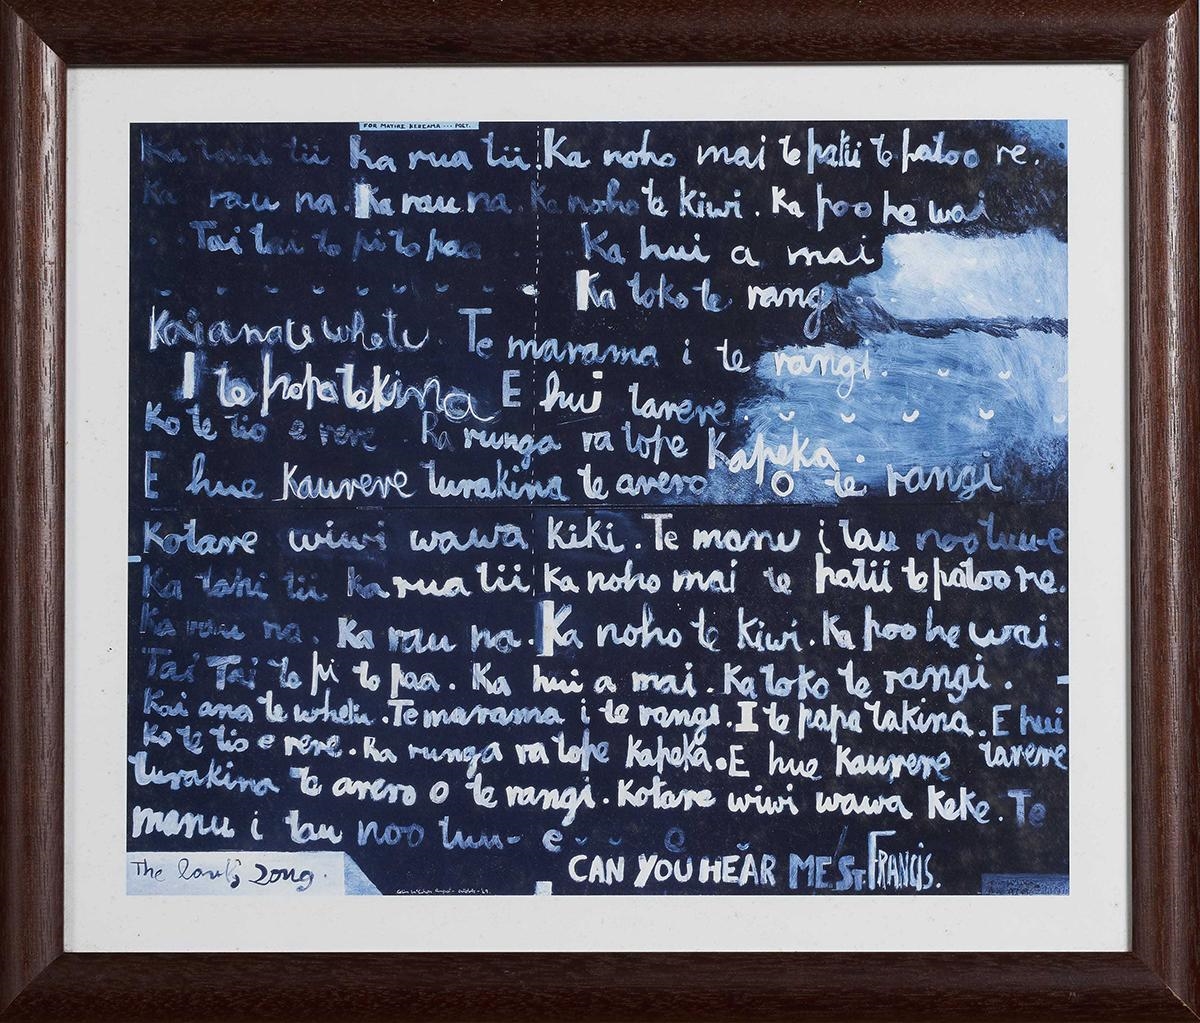 The Larks Song by Colin McCahon